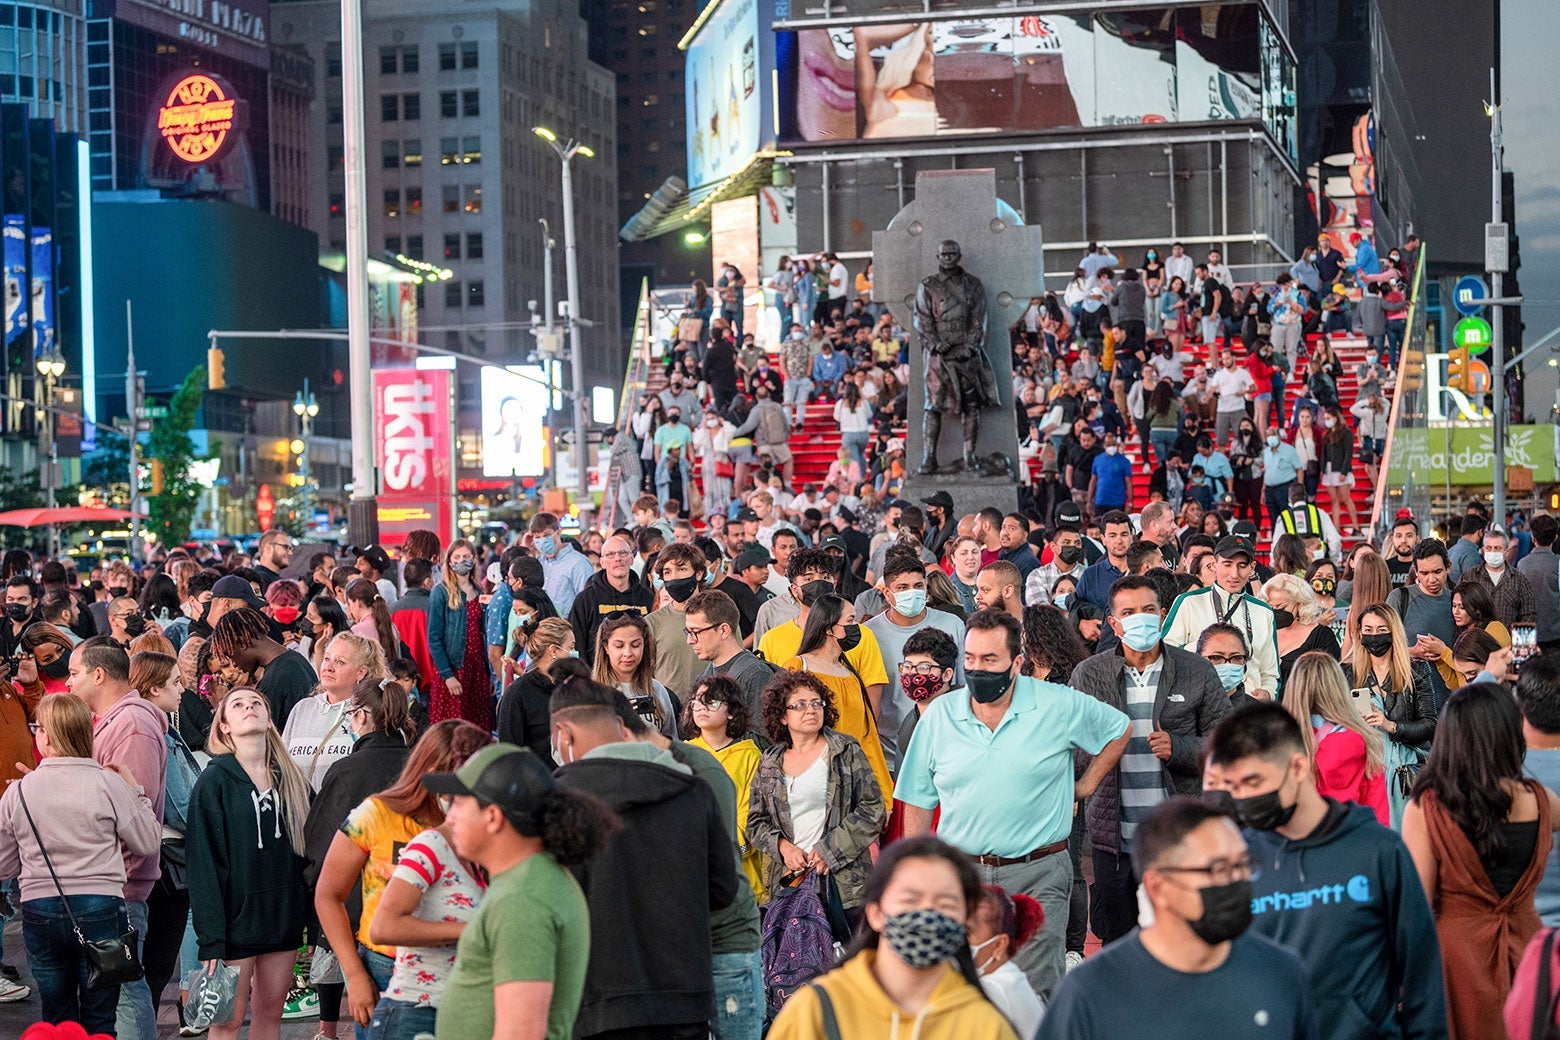 Large crowds of people with and without masks fill Times Square.